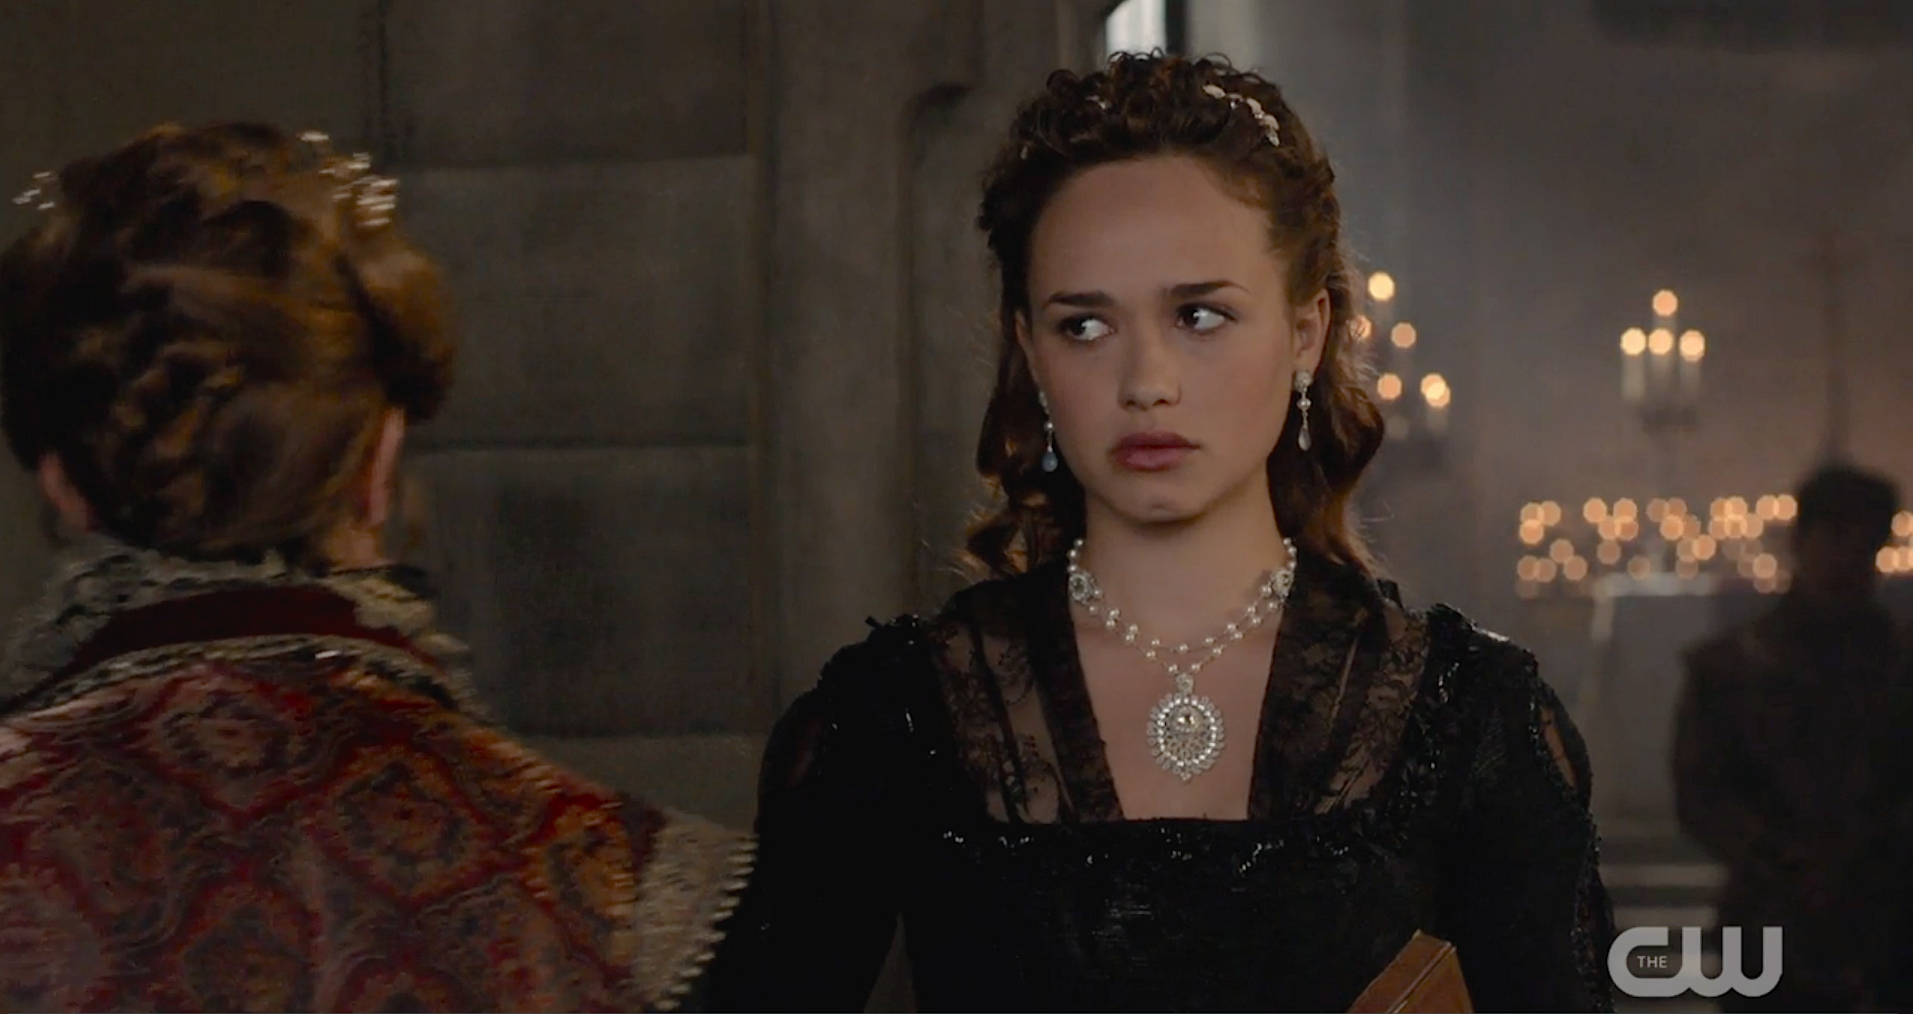  Edera 'Lilliane' necklace and 'Fleurette' earrings featured on Reign.&nbsp; 